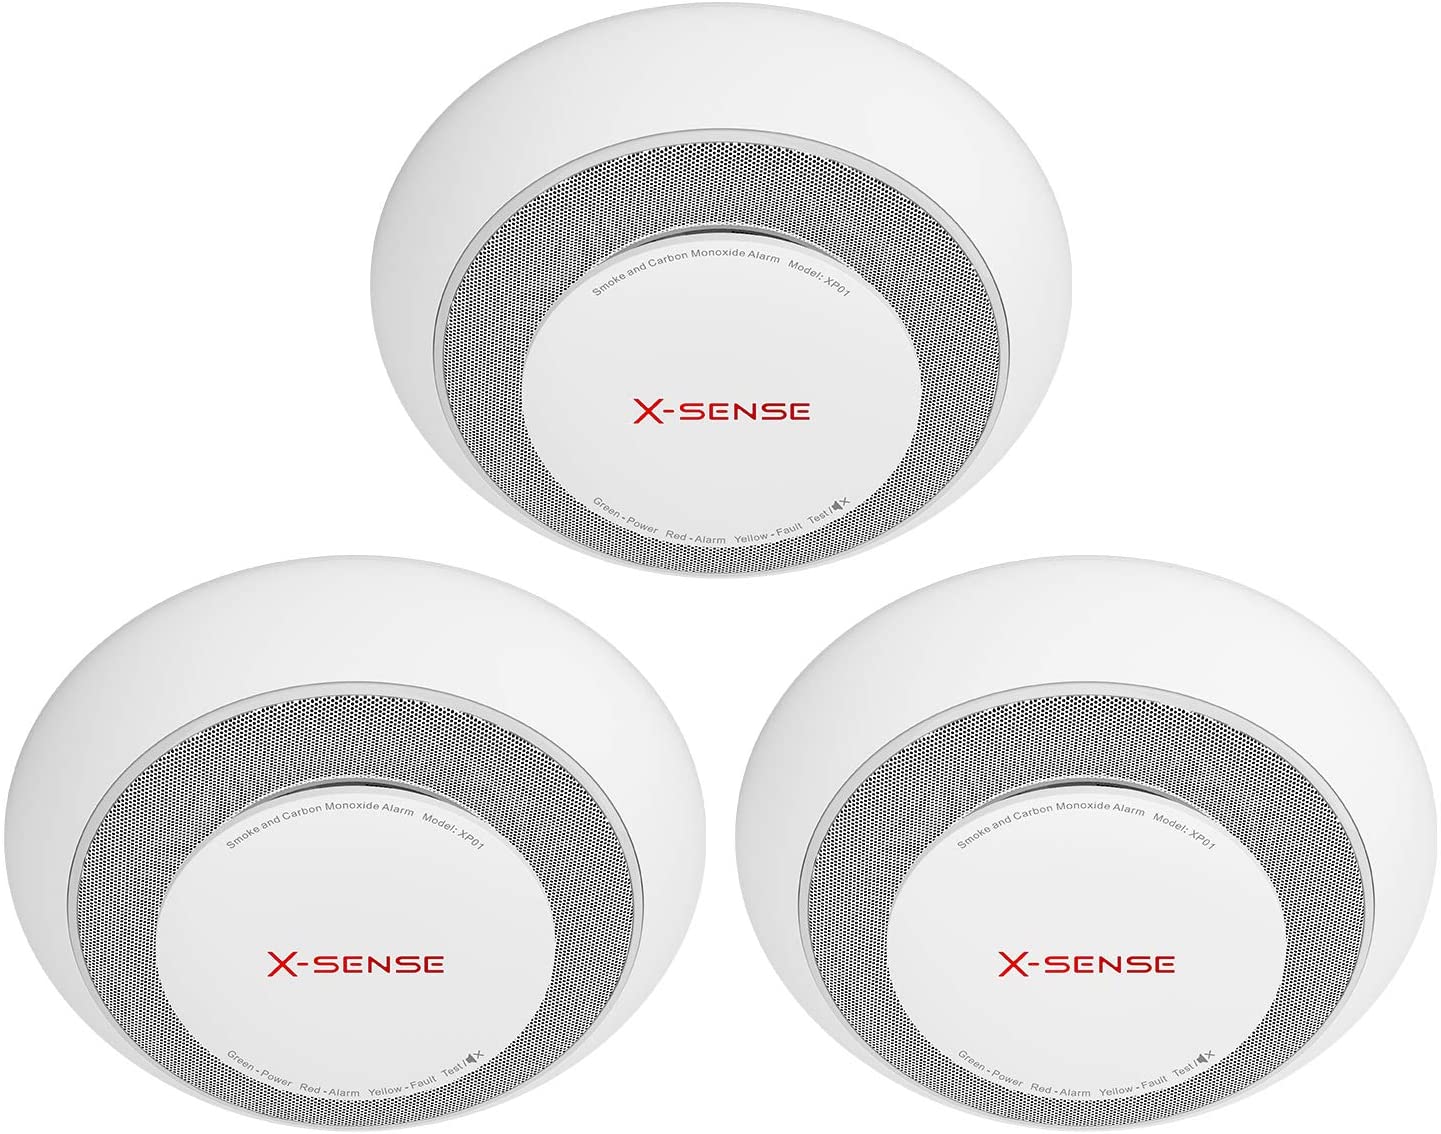 X-Sense XP01-W Smoke and Carbon Monoxide Alarm Detector with Up To 10-Year Battery